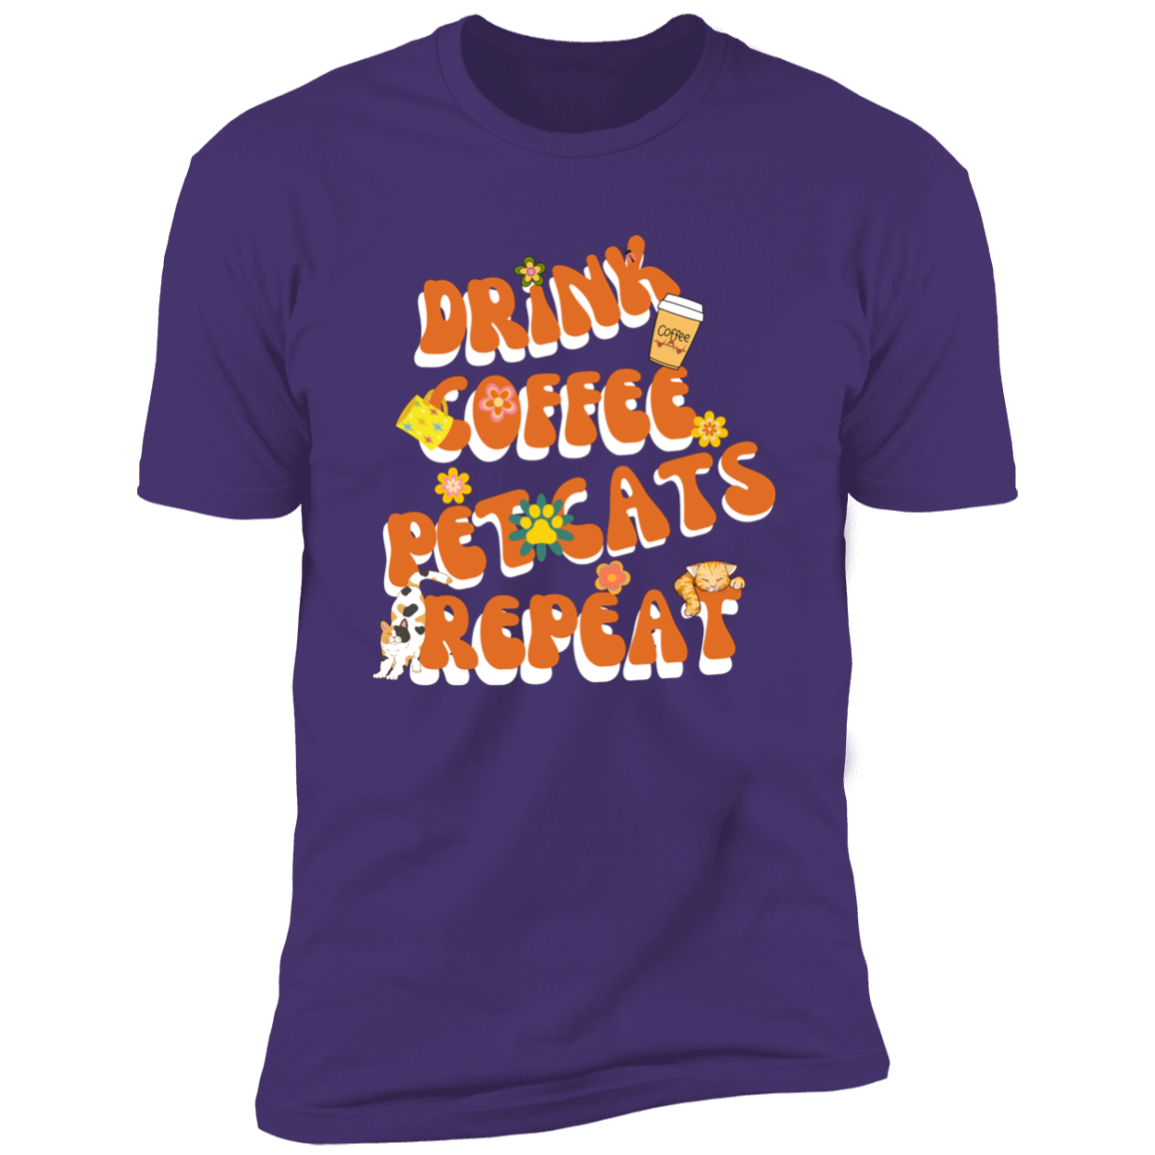 Drink Coffee Pet Cats Repeat T-shirt, Cat t-shirt for humans, in purple rush